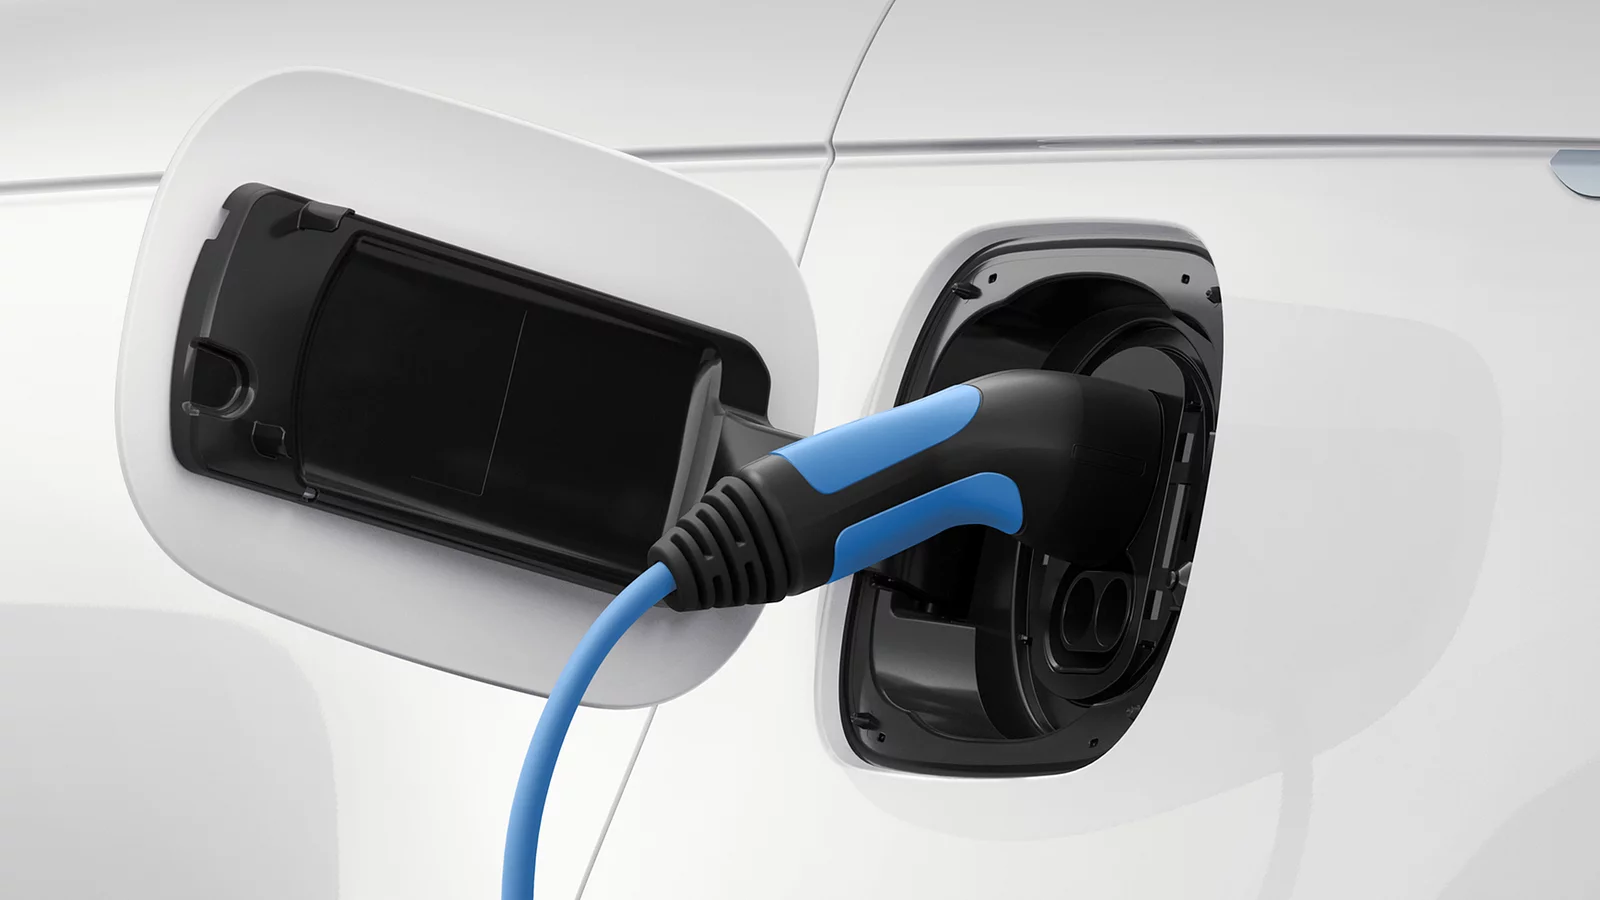 ELECTRIC AND ELECTRIC HYBRID (PHEV) CHARGING